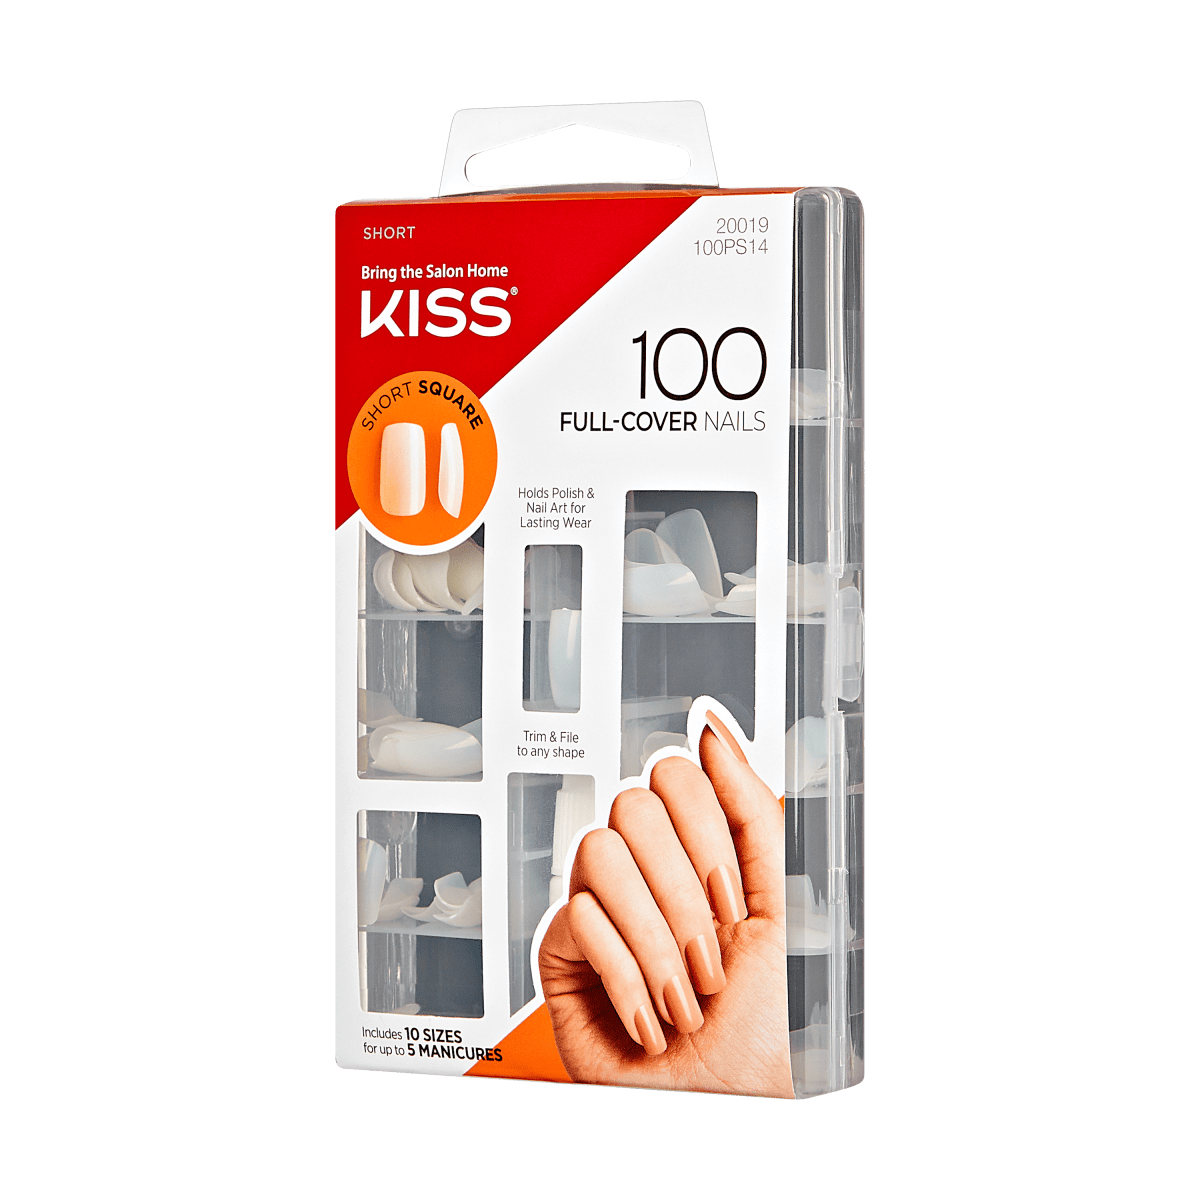 Buy Kiyan Artificial Nails Set With Glue Acrylic Face Nails Set Of 100 Pcs  and Artificial Nail Glue 3gm Artificial Nails Reusable Online at Low Prices  in India - Amazon.in